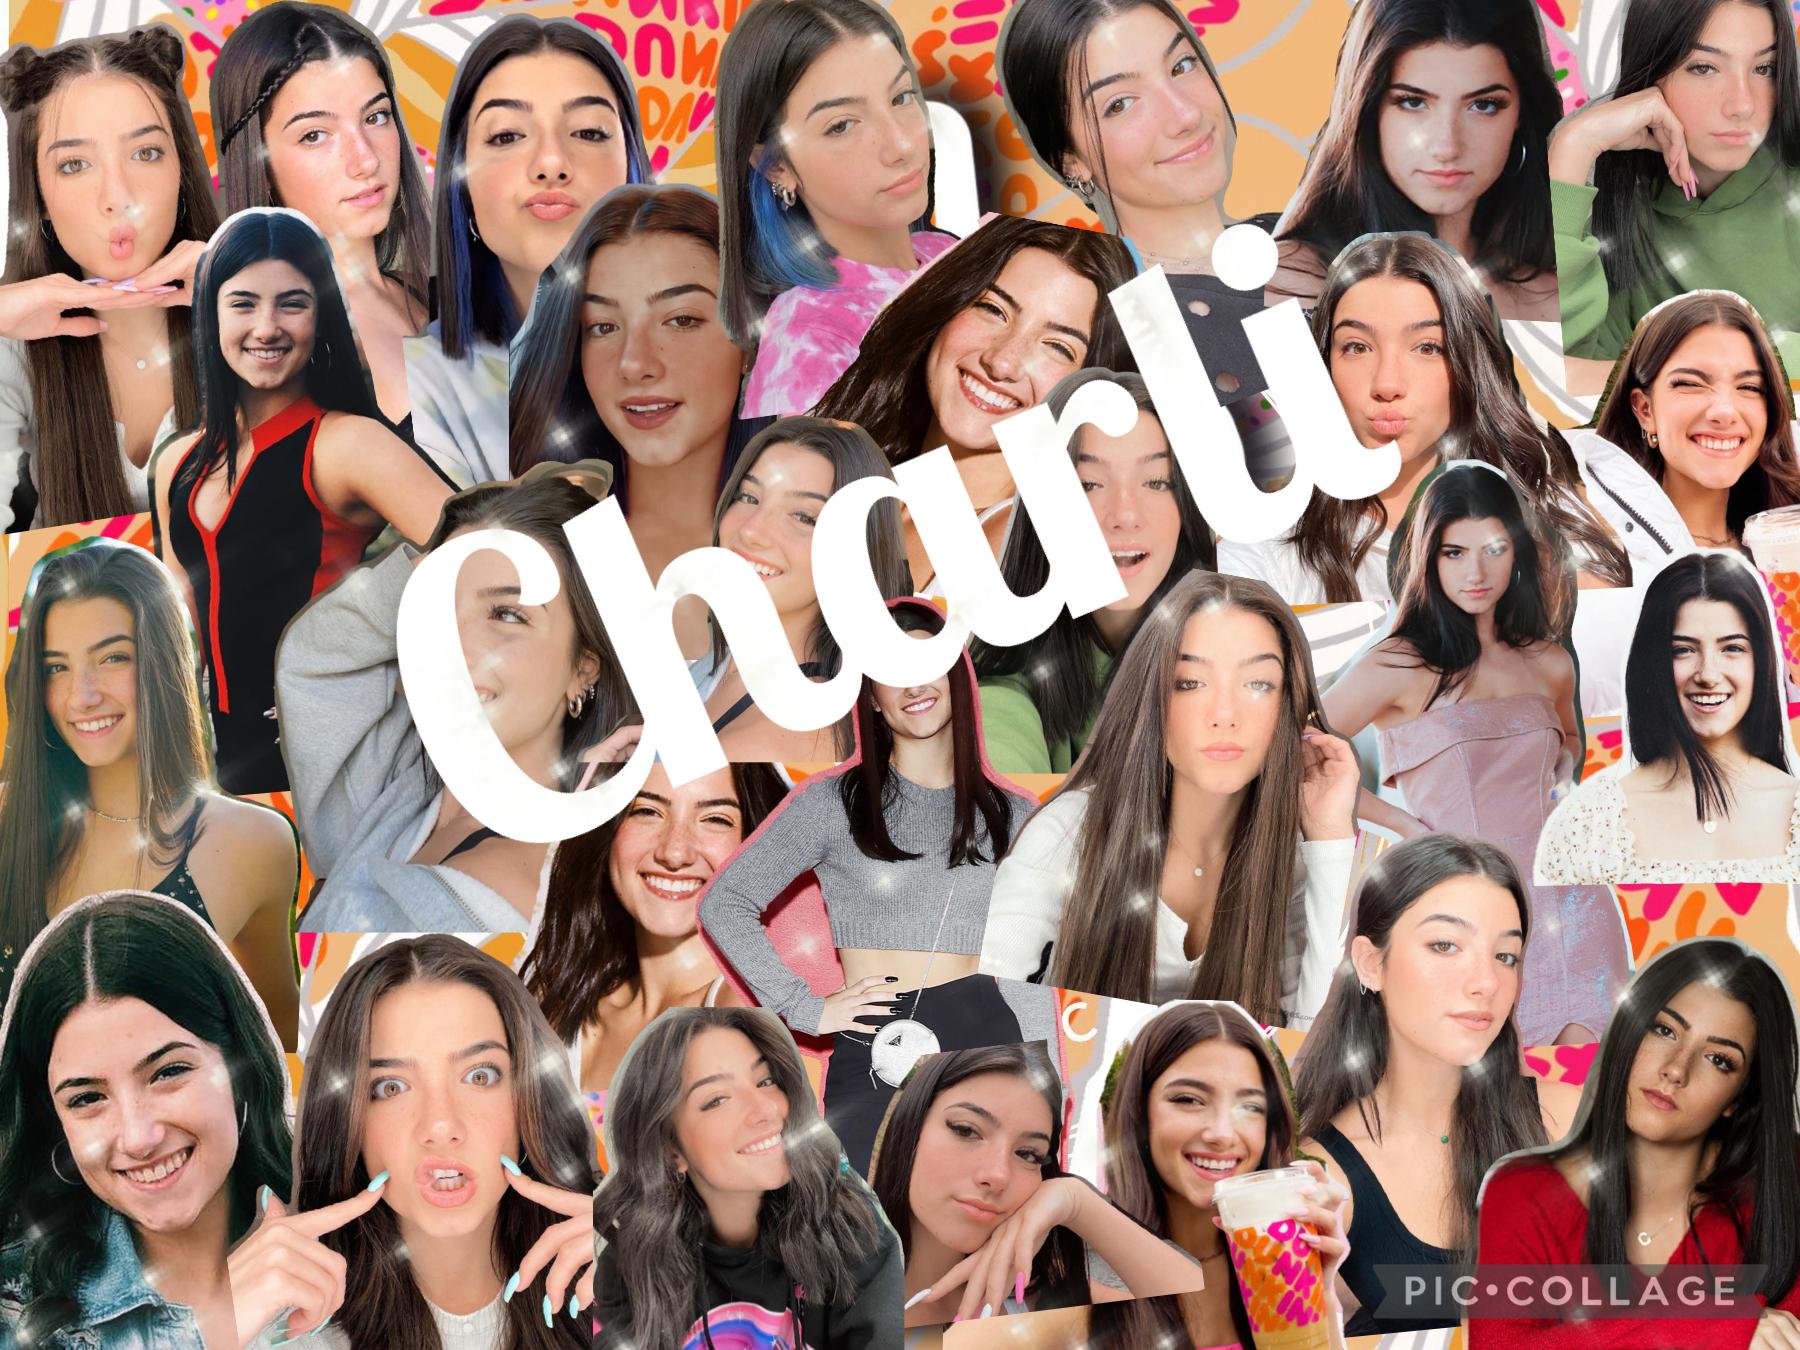 Charli D’melio collage! Others coming soon!